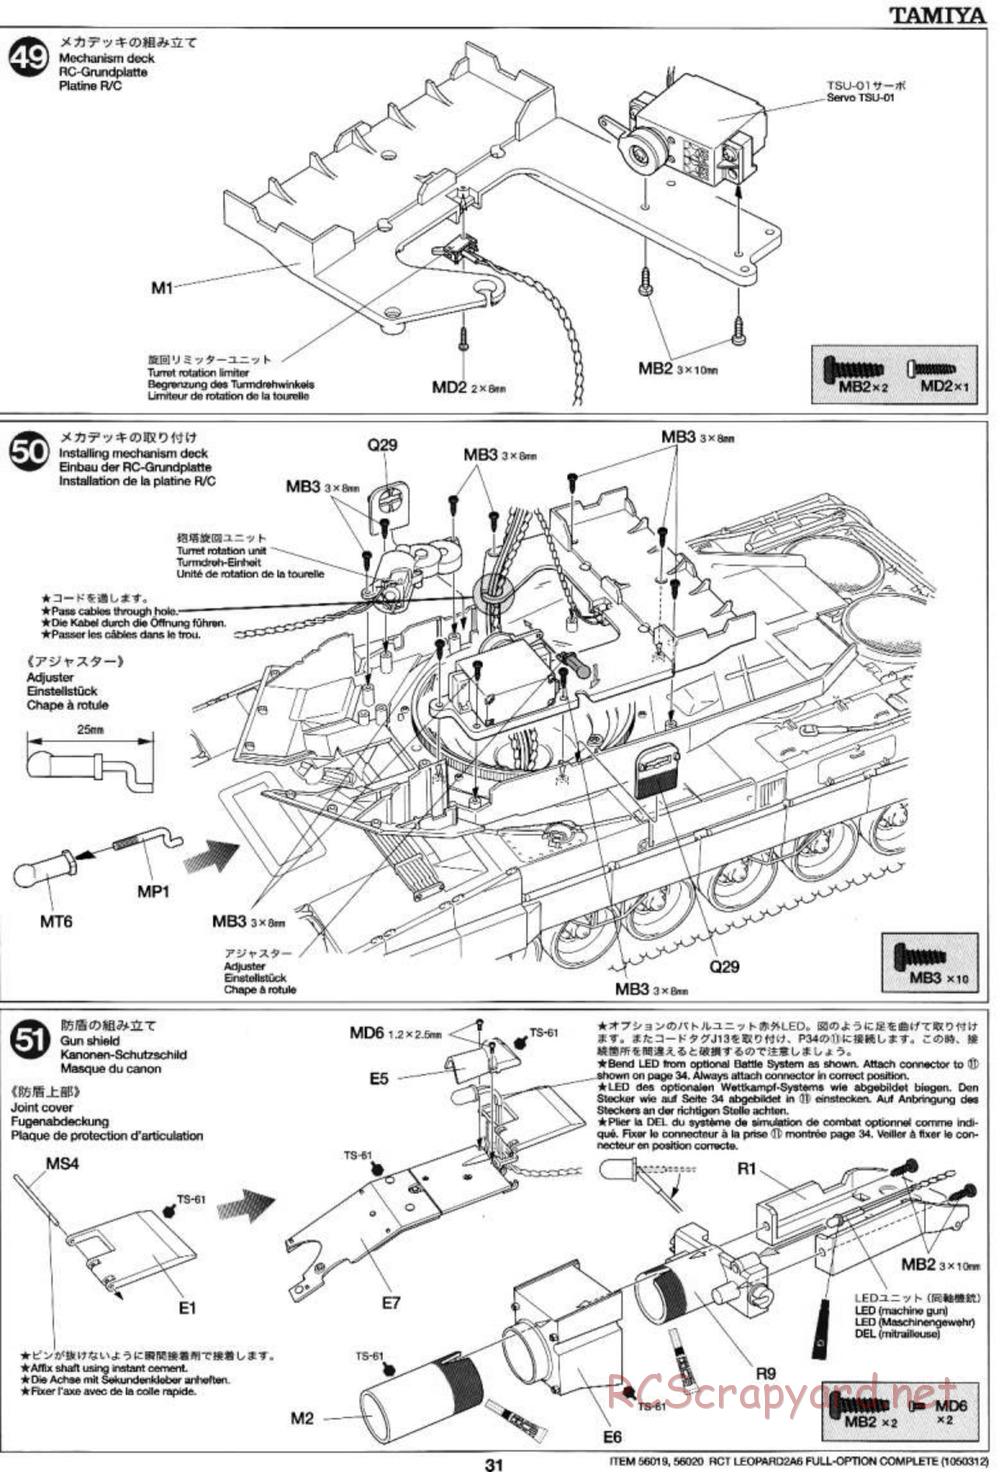 Tamiya - Leopard 2 A6 - 1/16 Scale Chassis - Manual - Page 31